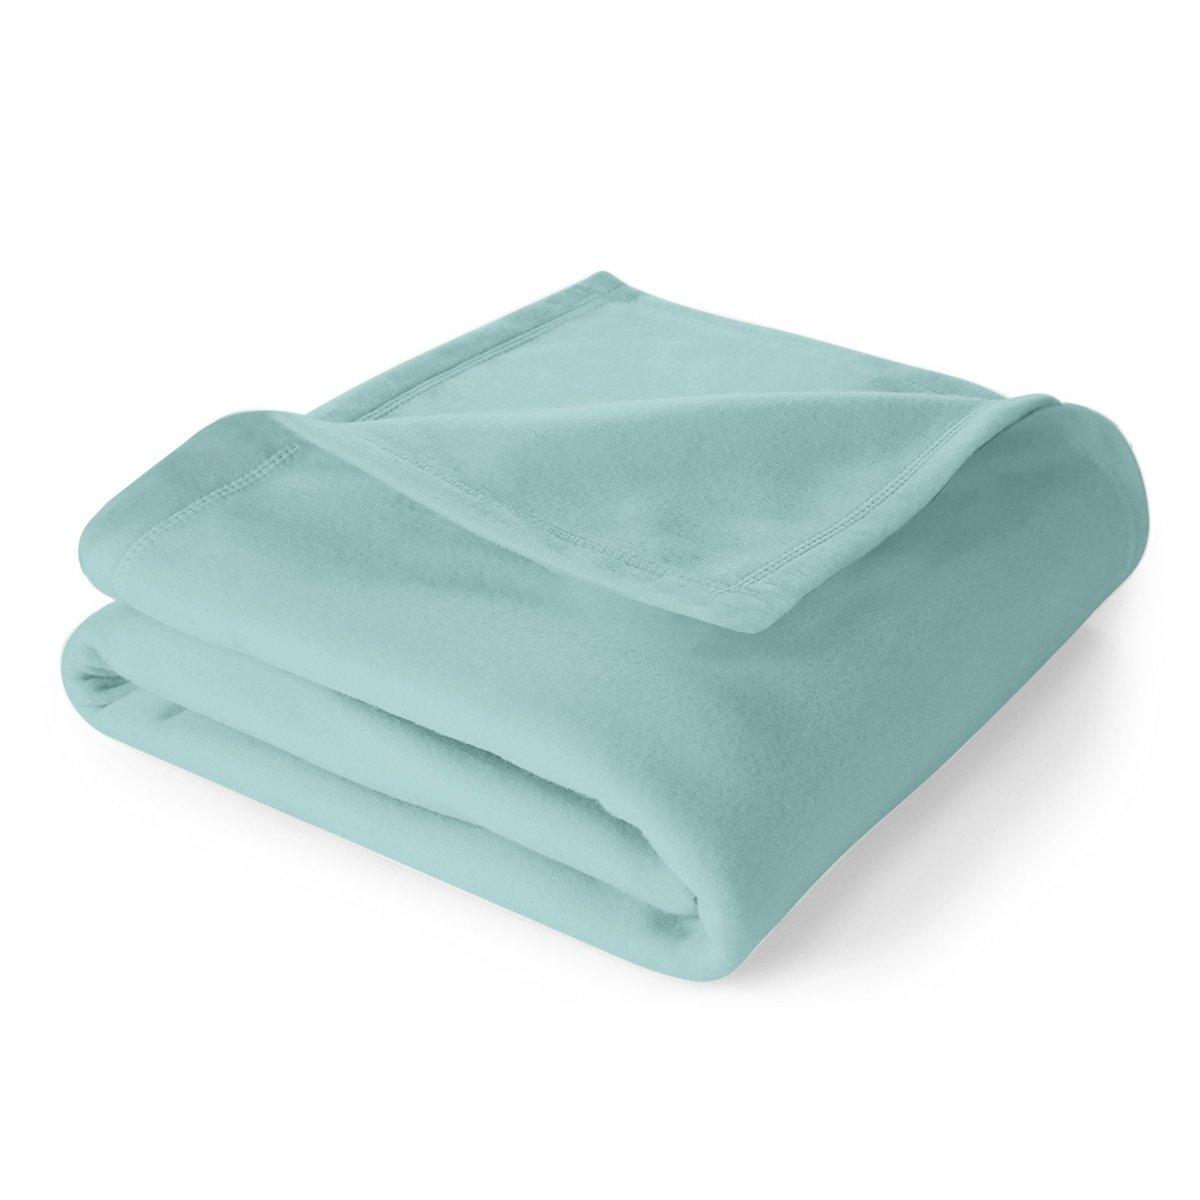 Ultra Soft Oversized Plush Solid Throw Blanket - Stylish Home Décor for Bed or Couch - Spirit Linen